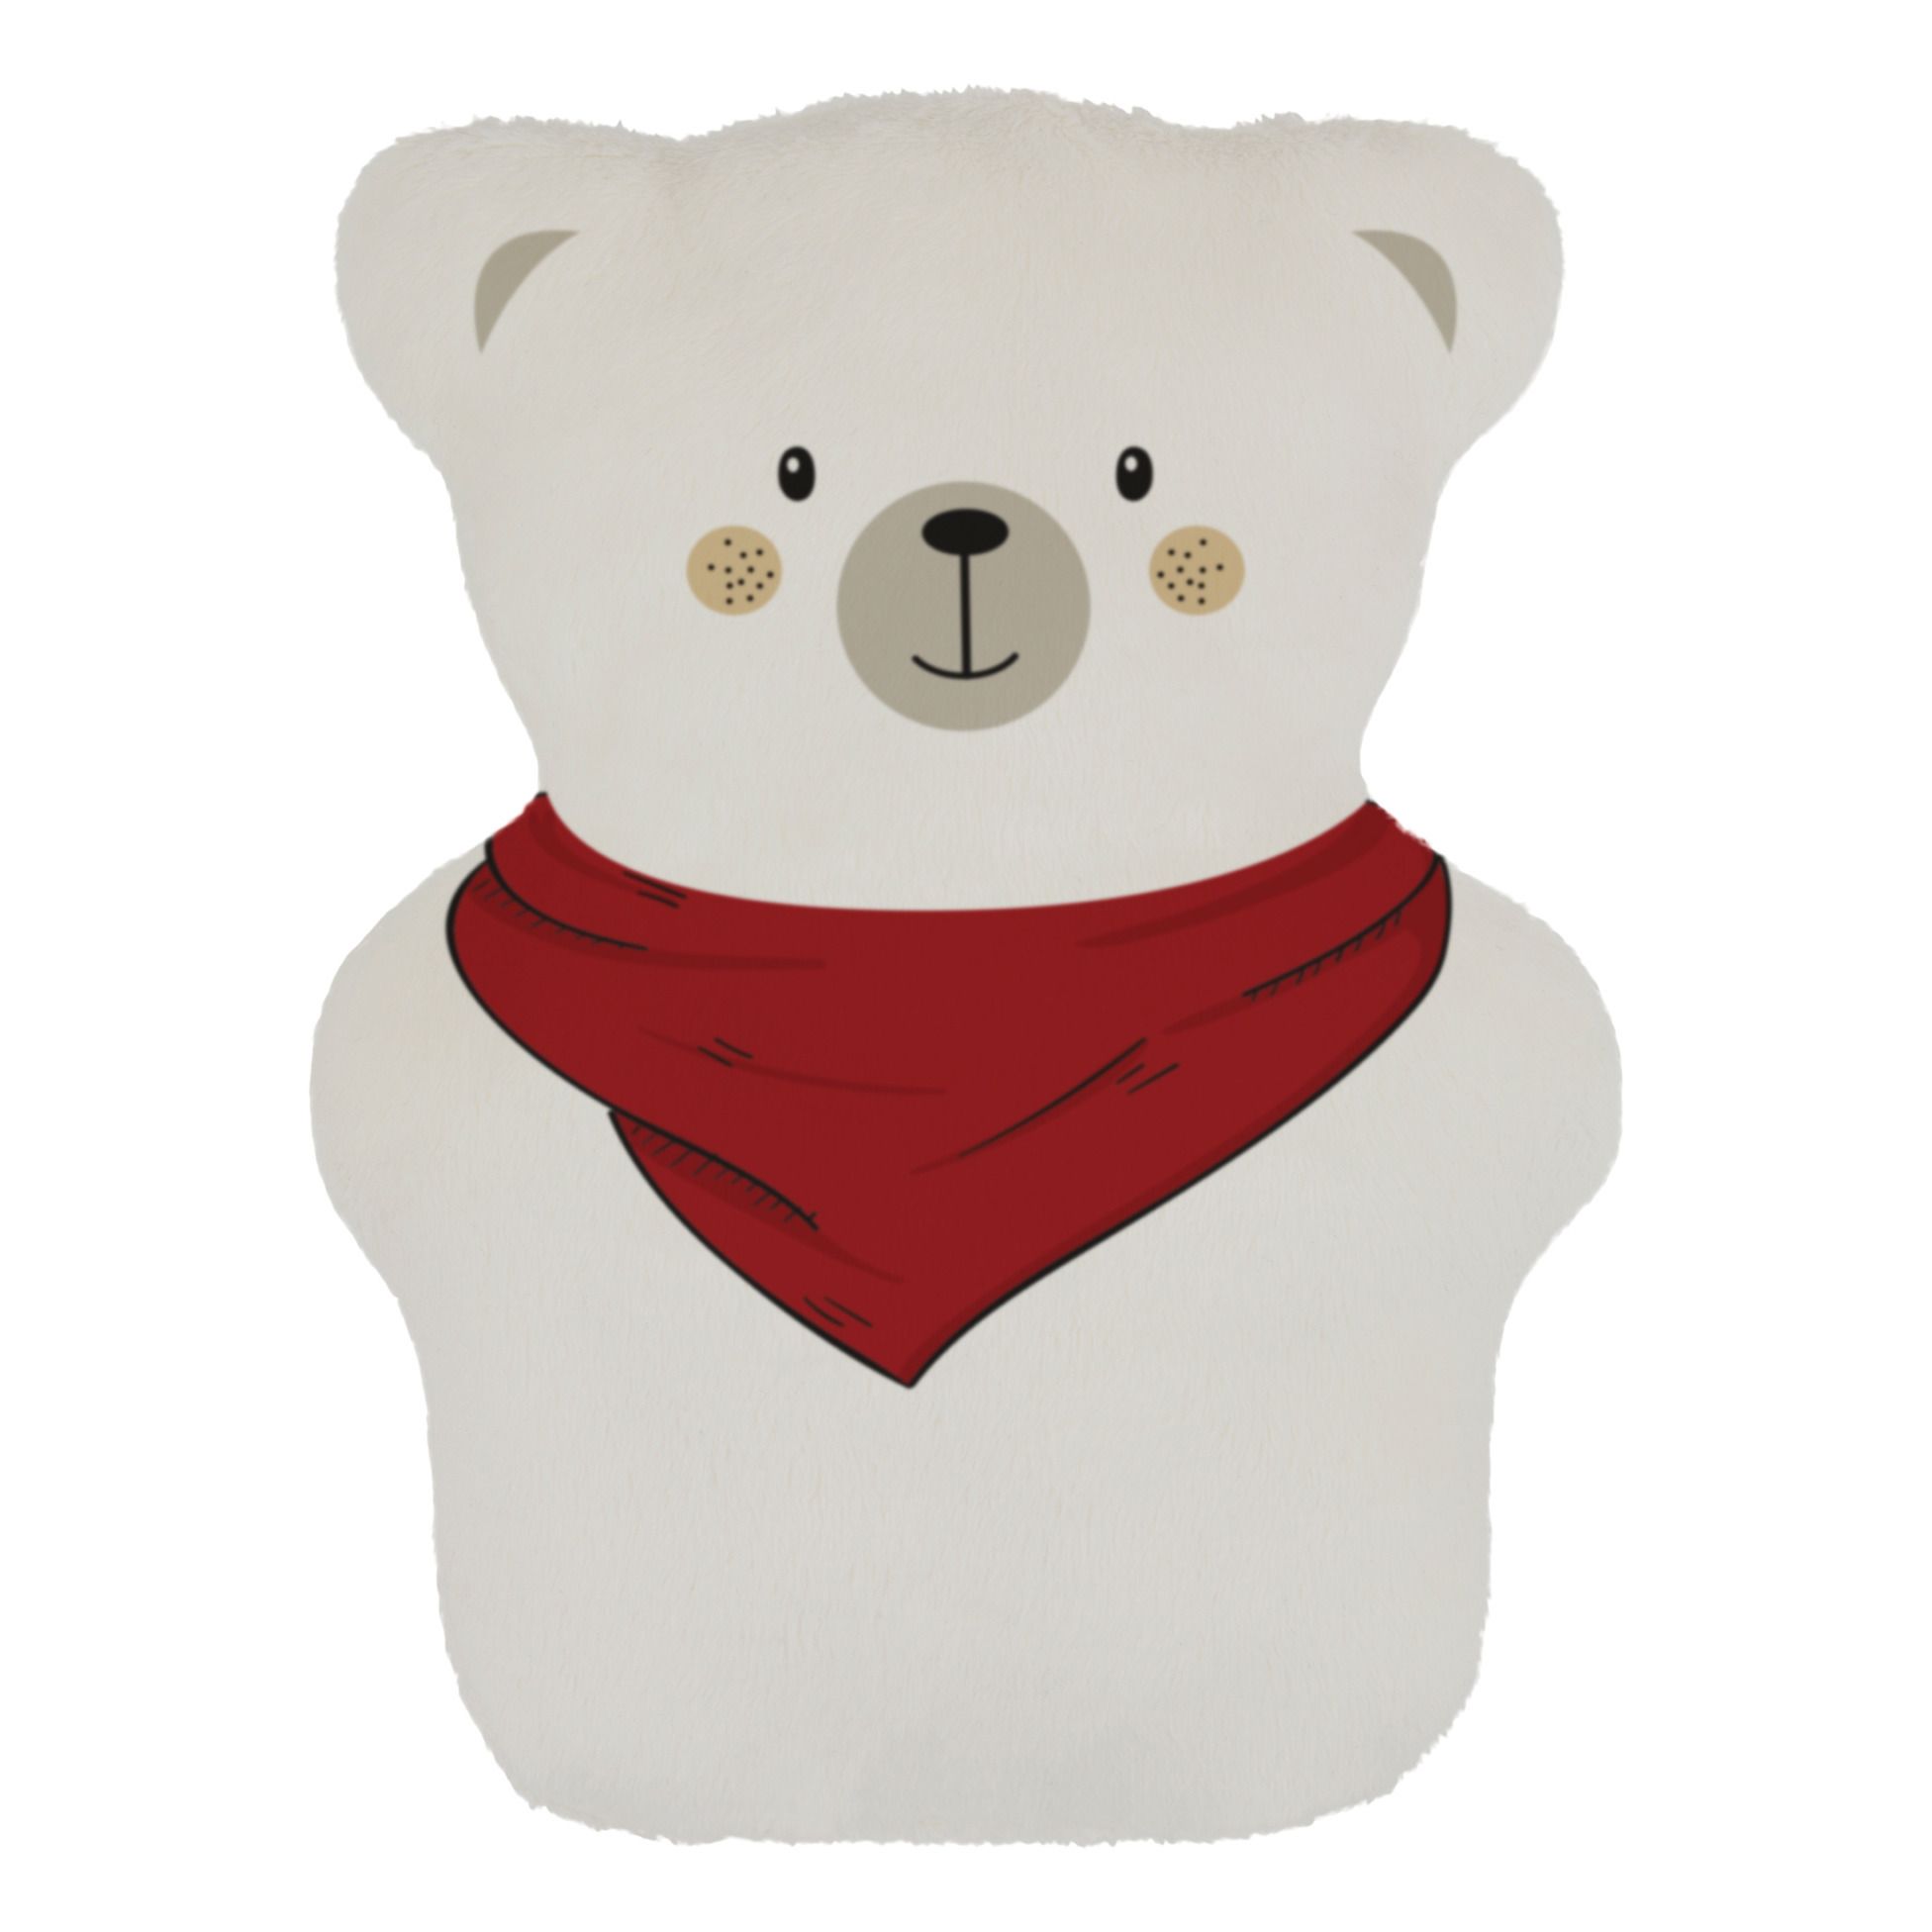 Product Video Placeholder: Therapeutic bear